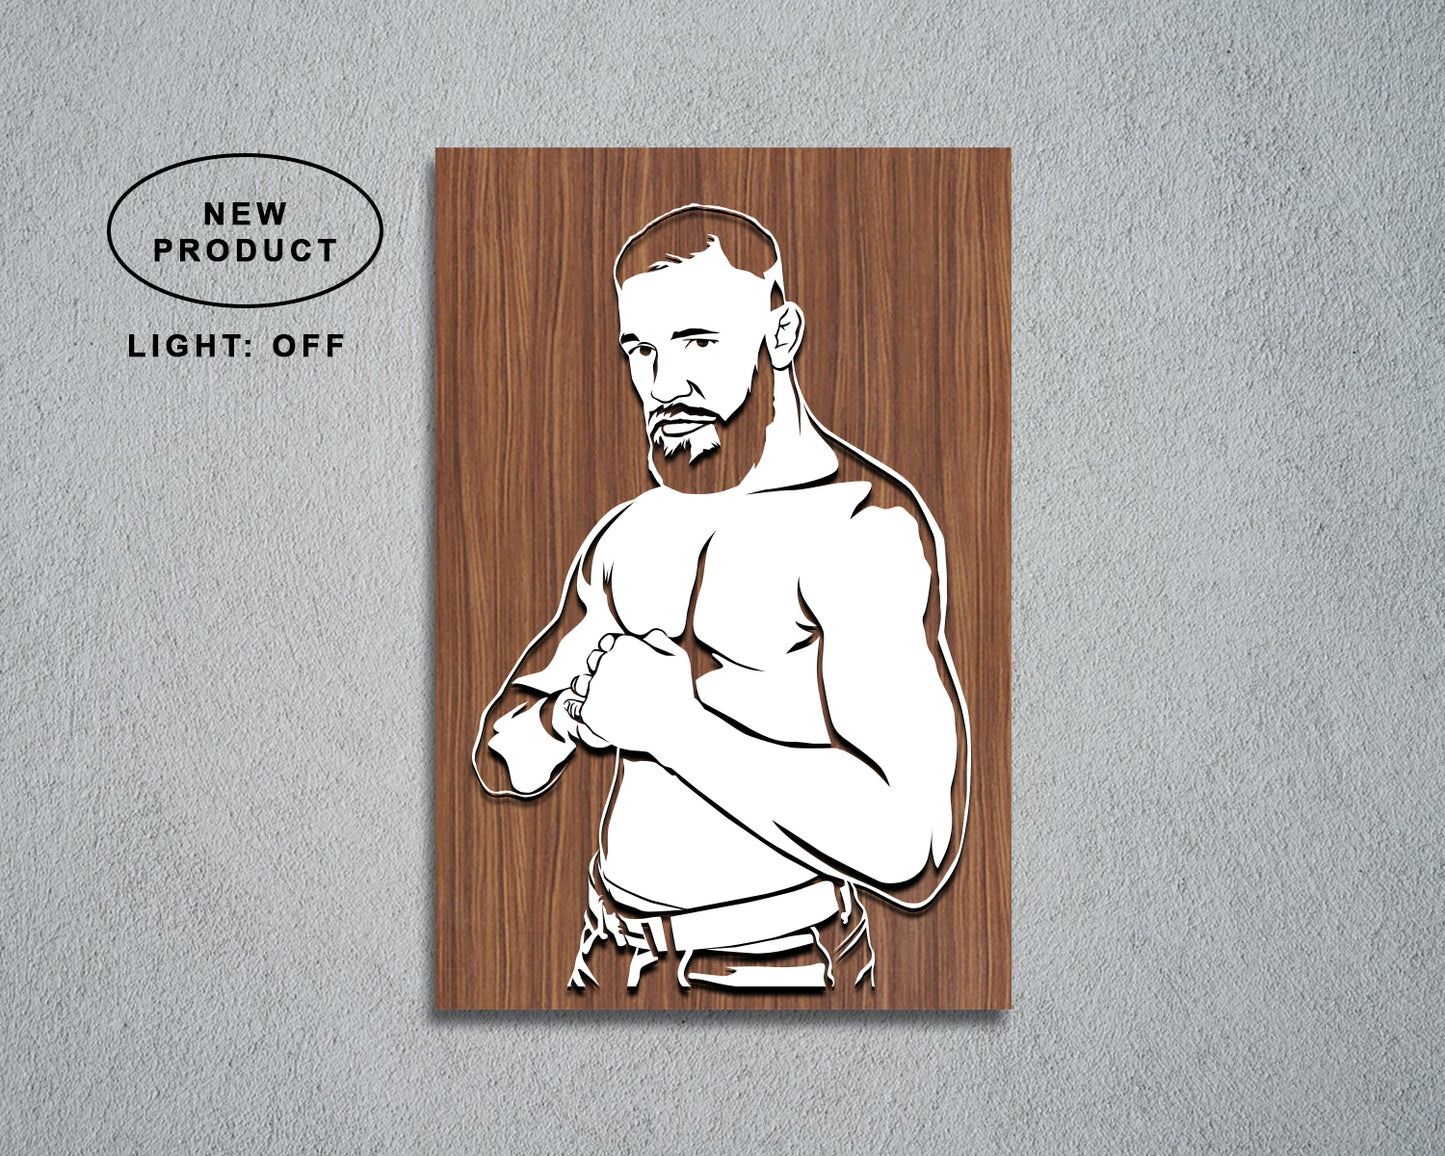 Conor McGregor LED Wooden Decal